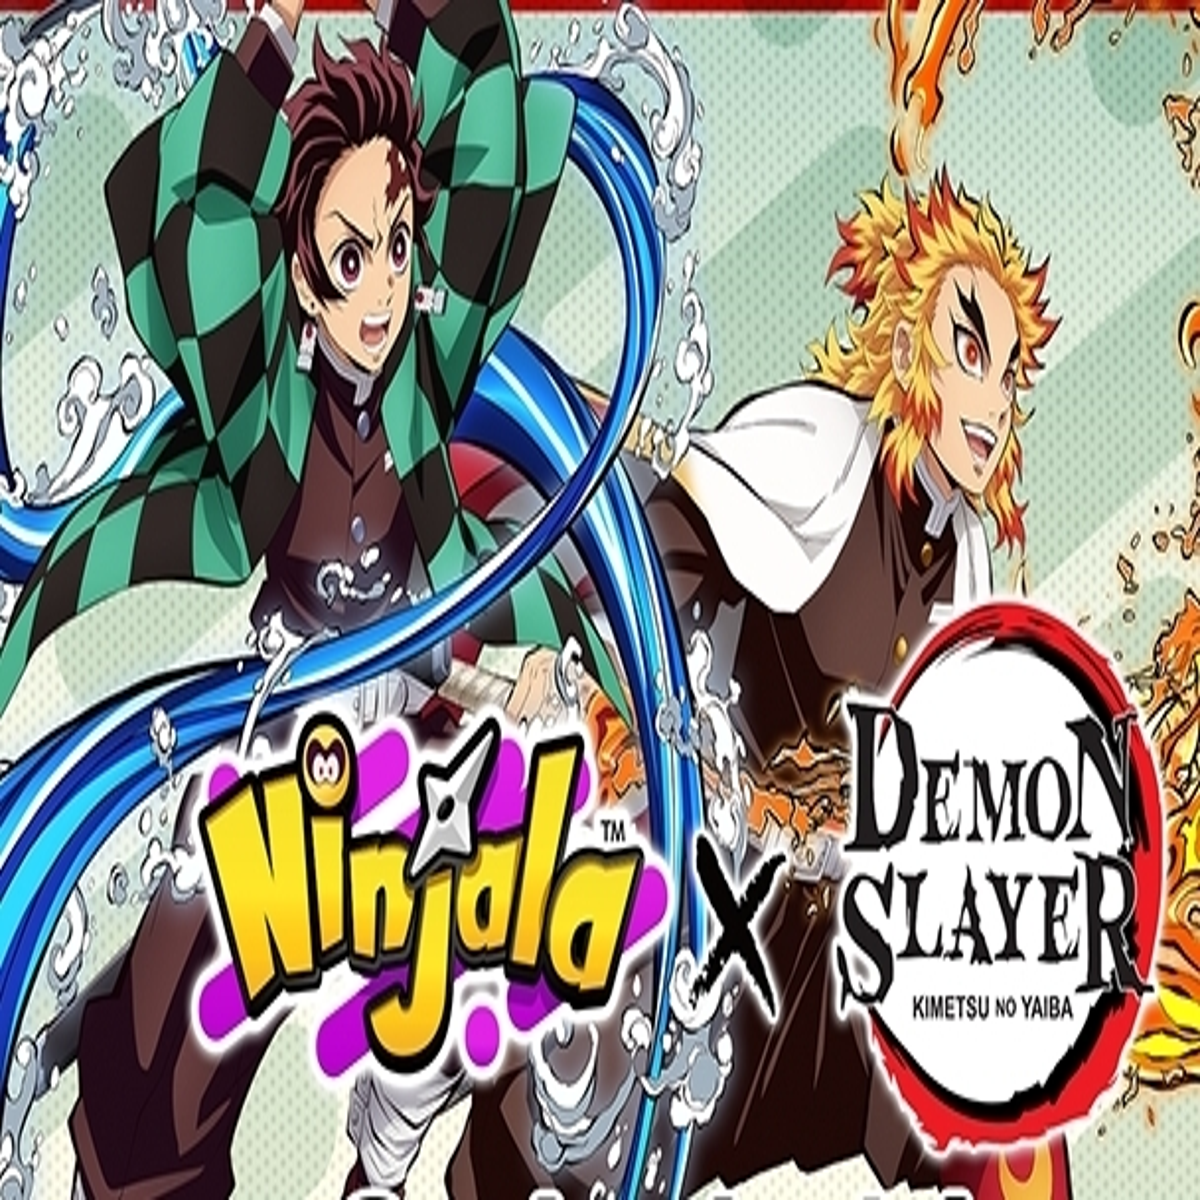 How to become a member of the demon slayer corps in project slayer